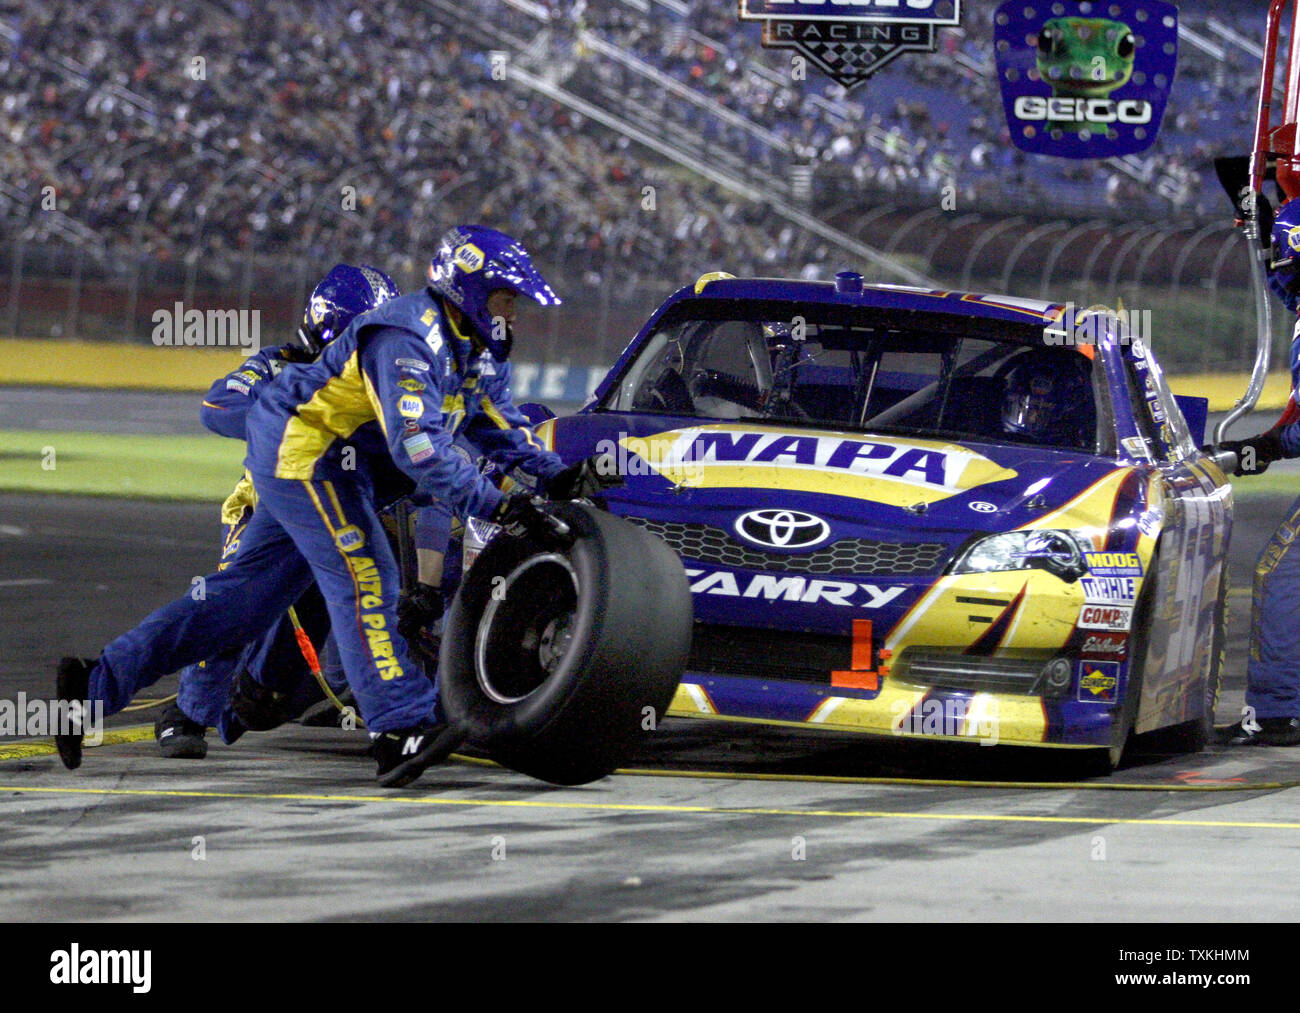 Crew members perform a pit stop for Mark Martin at the Bank of America 500 NASCAR Race at the Charlotte Motor Speedway in Concord, North Carolina on October 13, 2012.    UPI/Nell Redmond. Stock Photo